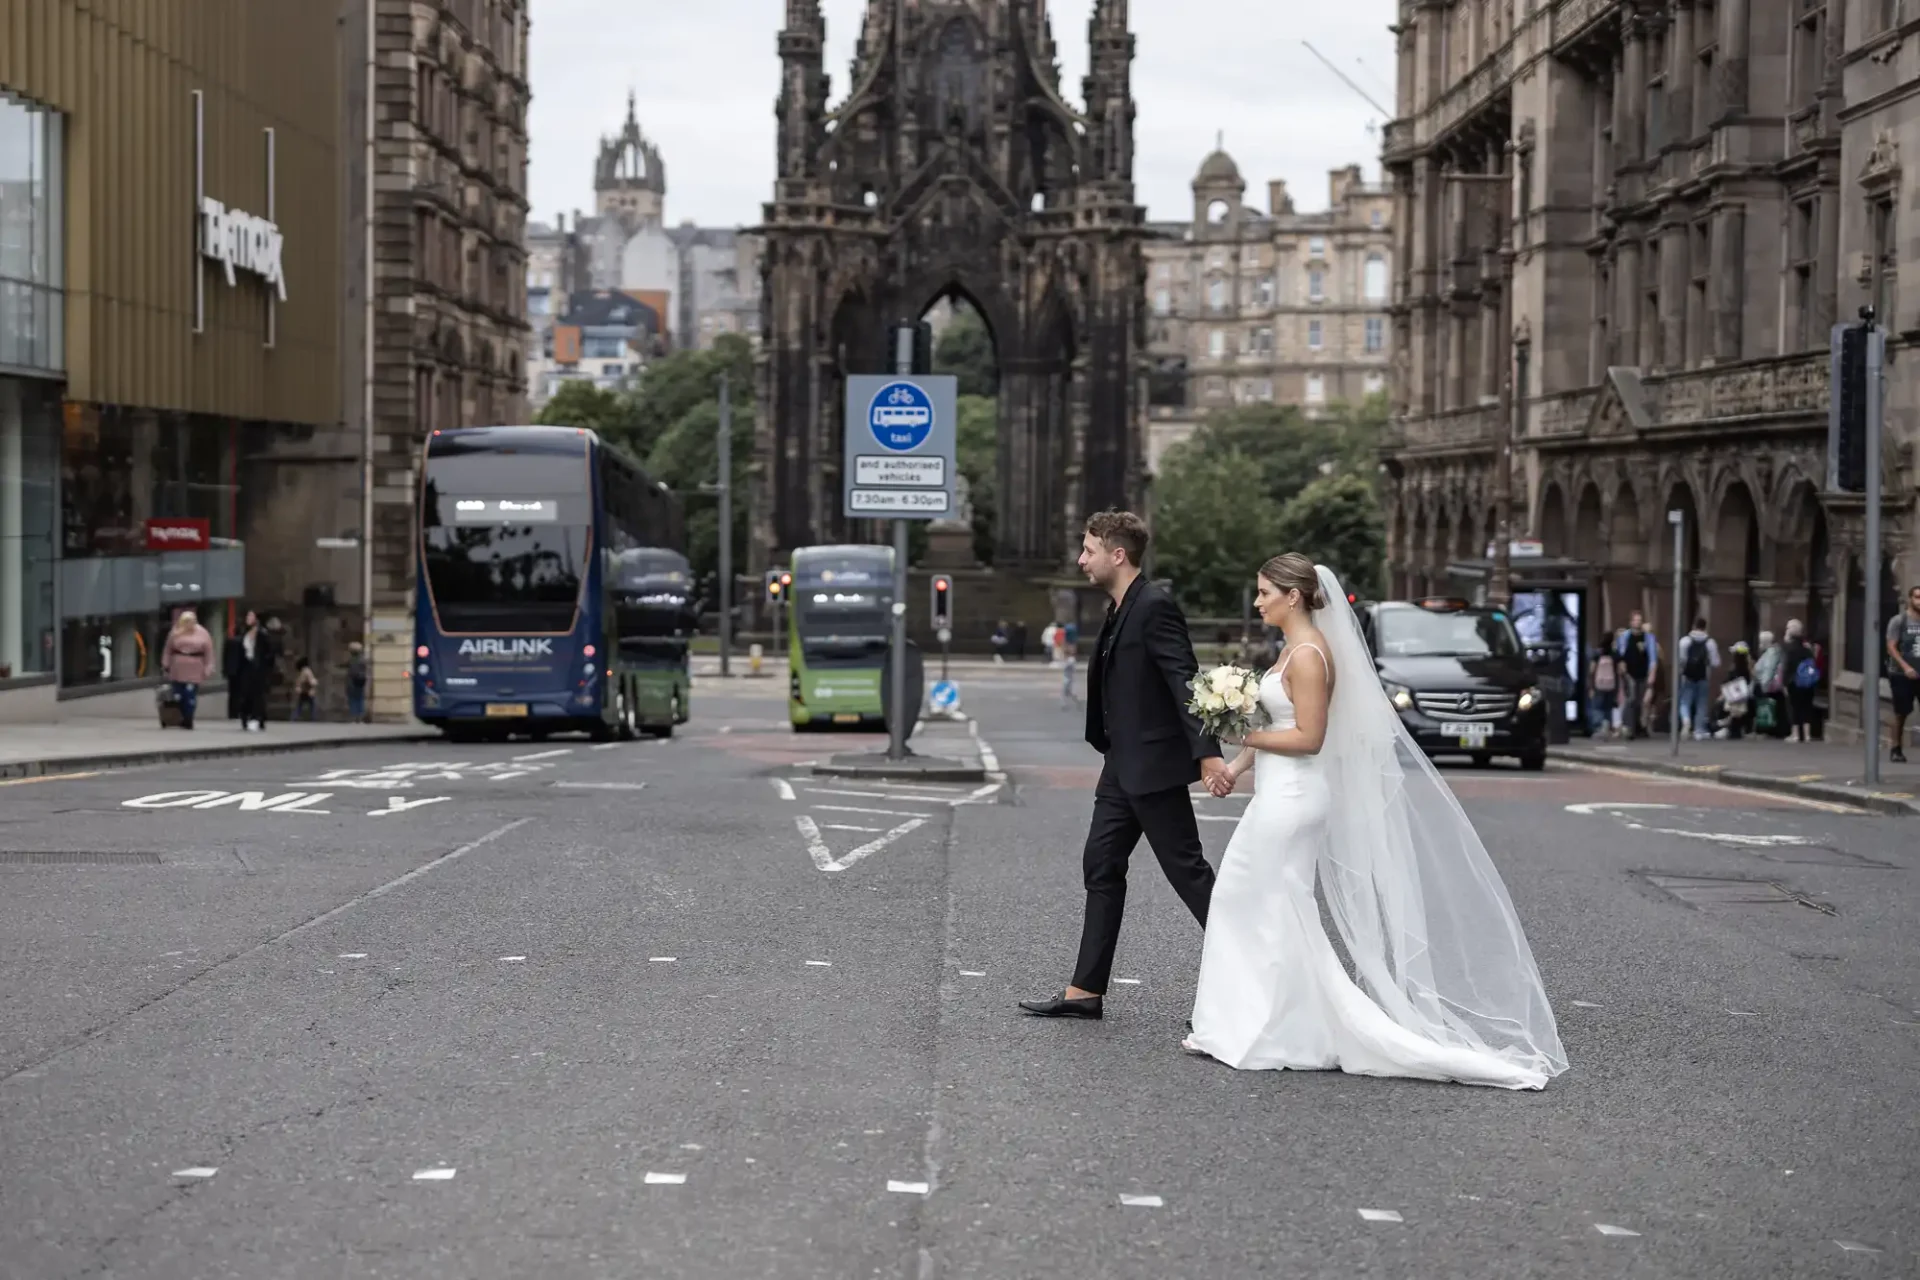 A bride and groom holding hands, crossing an urban street with a bus and classic architecture in the background.